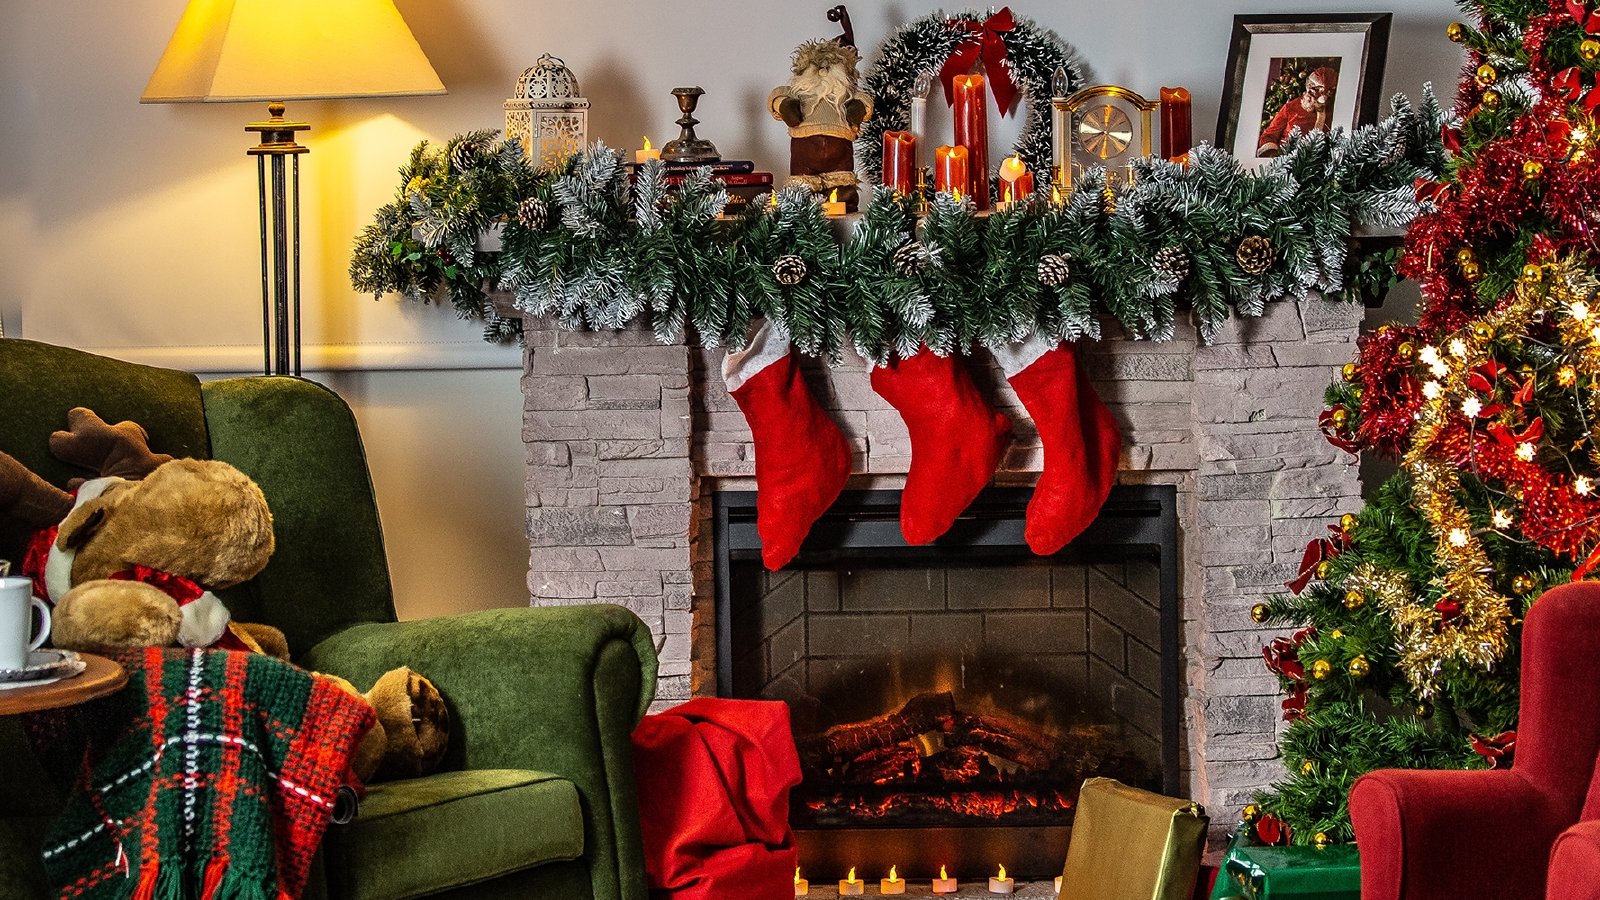 A room with christmas decorations like stockings, garlands, and christmas rugs